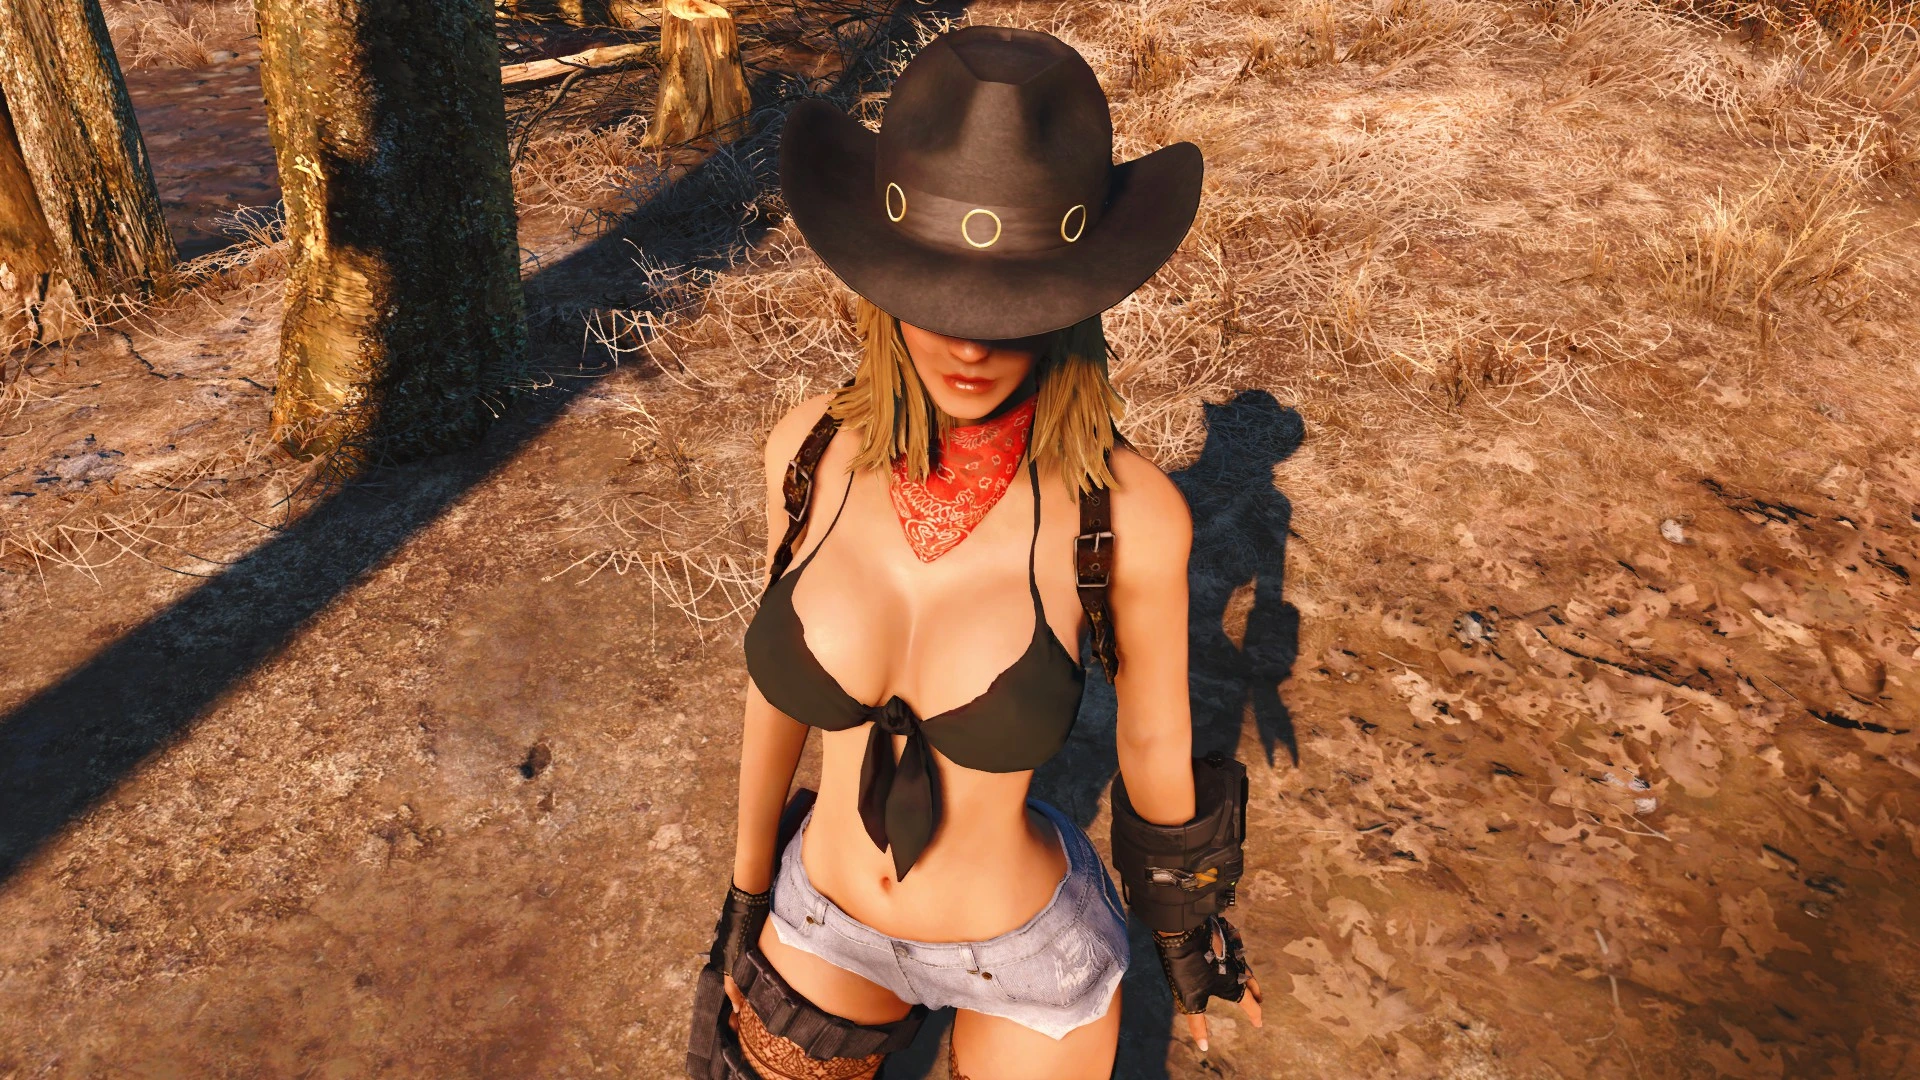 Reserve Cowgirl